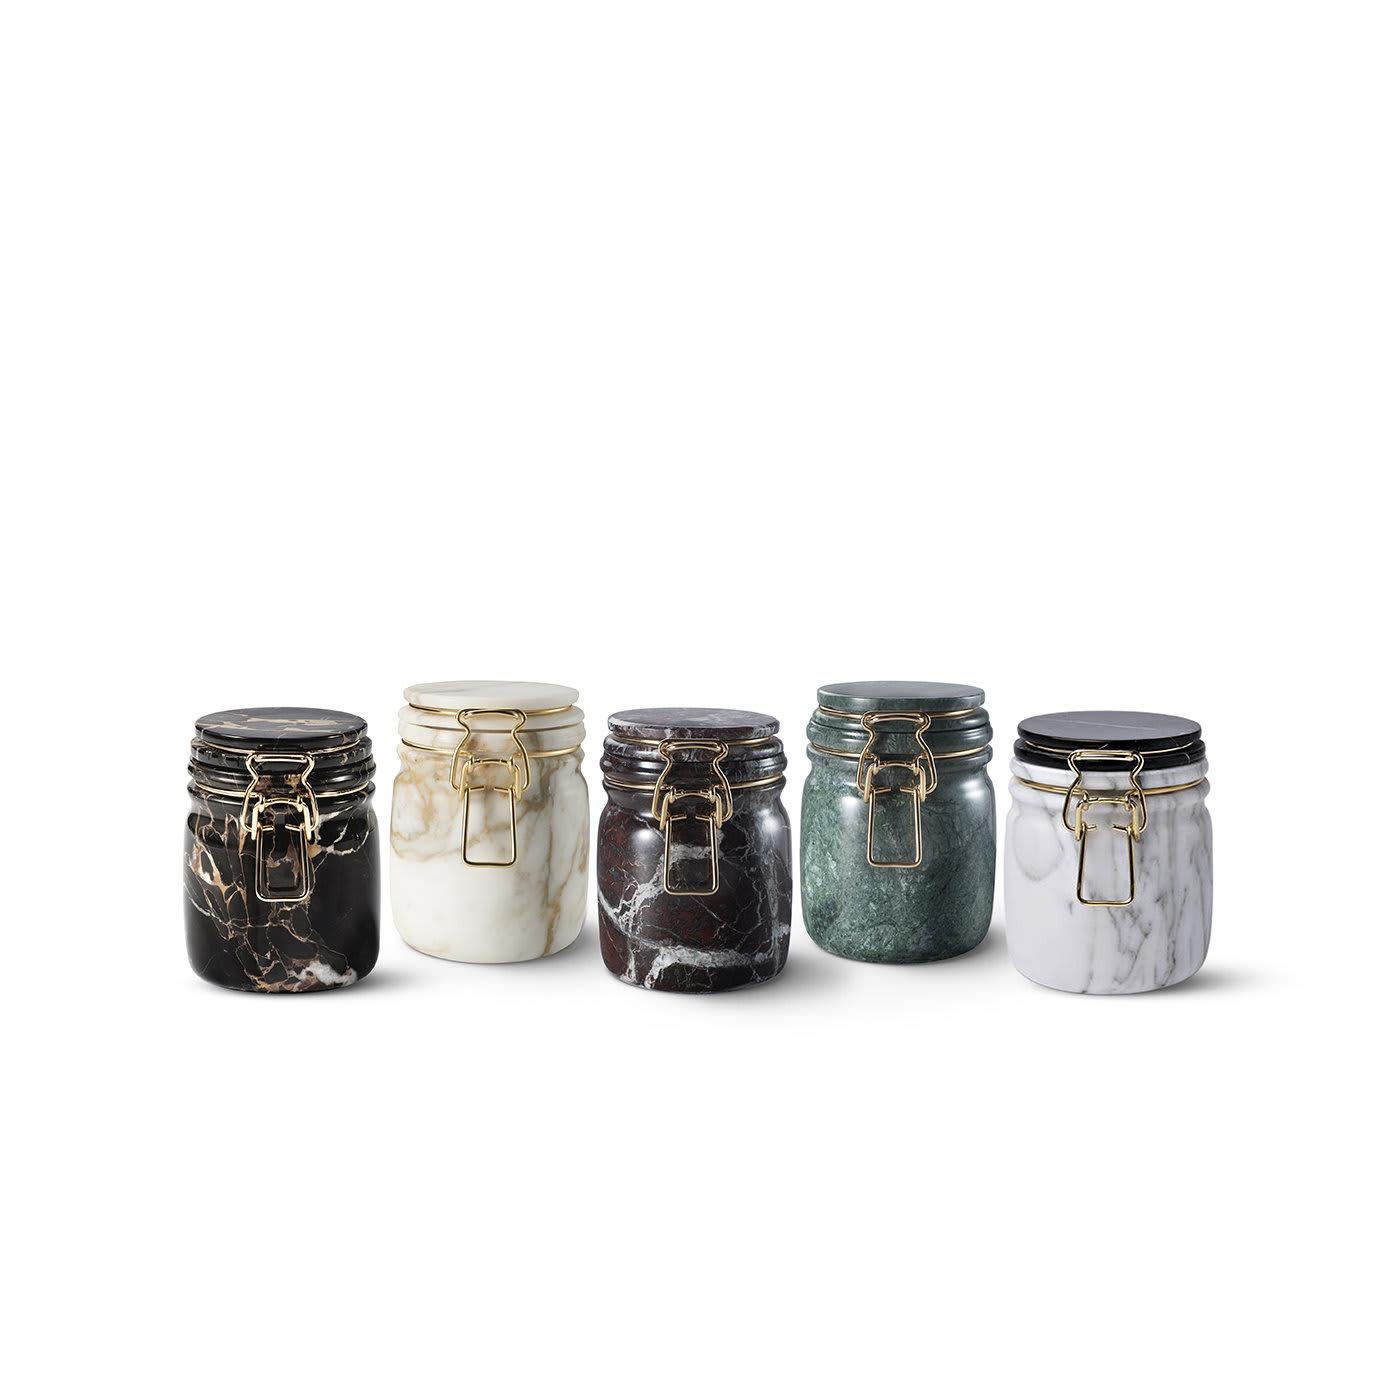 An ironic and sophisticated take on the traditional jam jar, this piece of functional decor will make also a stunning decoration that can be displayed anywhere in the house, either alone or combined with the other jars of the Miss Marble collection.